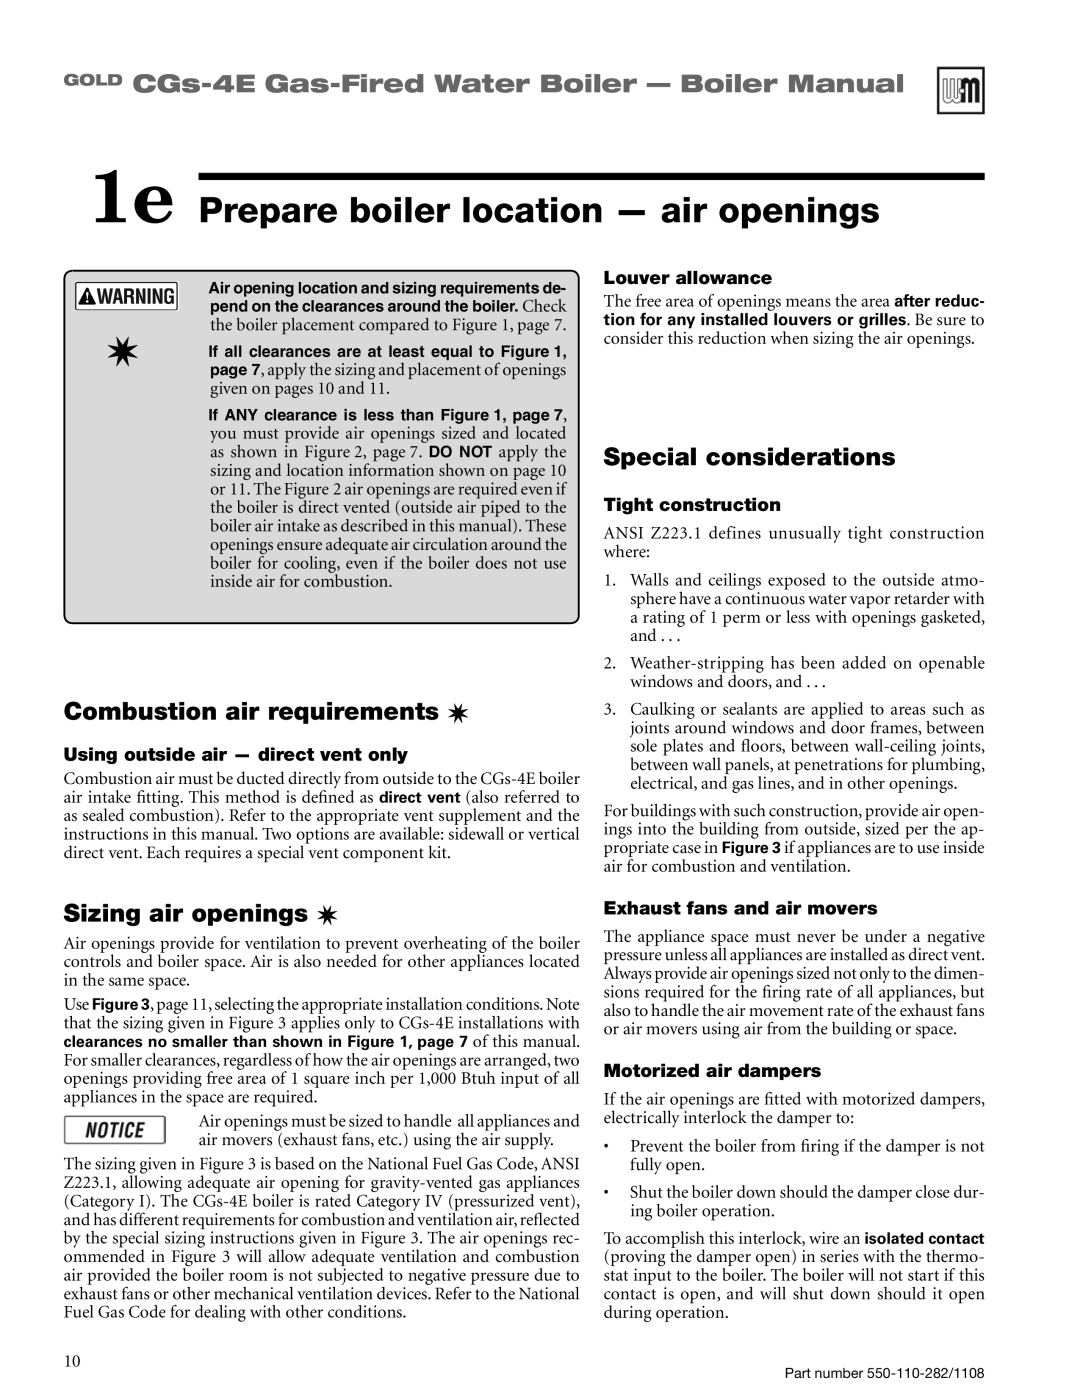 Weil-McLain CGS-4E manual 1e Prepare boiler location - air openings, Combustion air requirements, Special considerations 